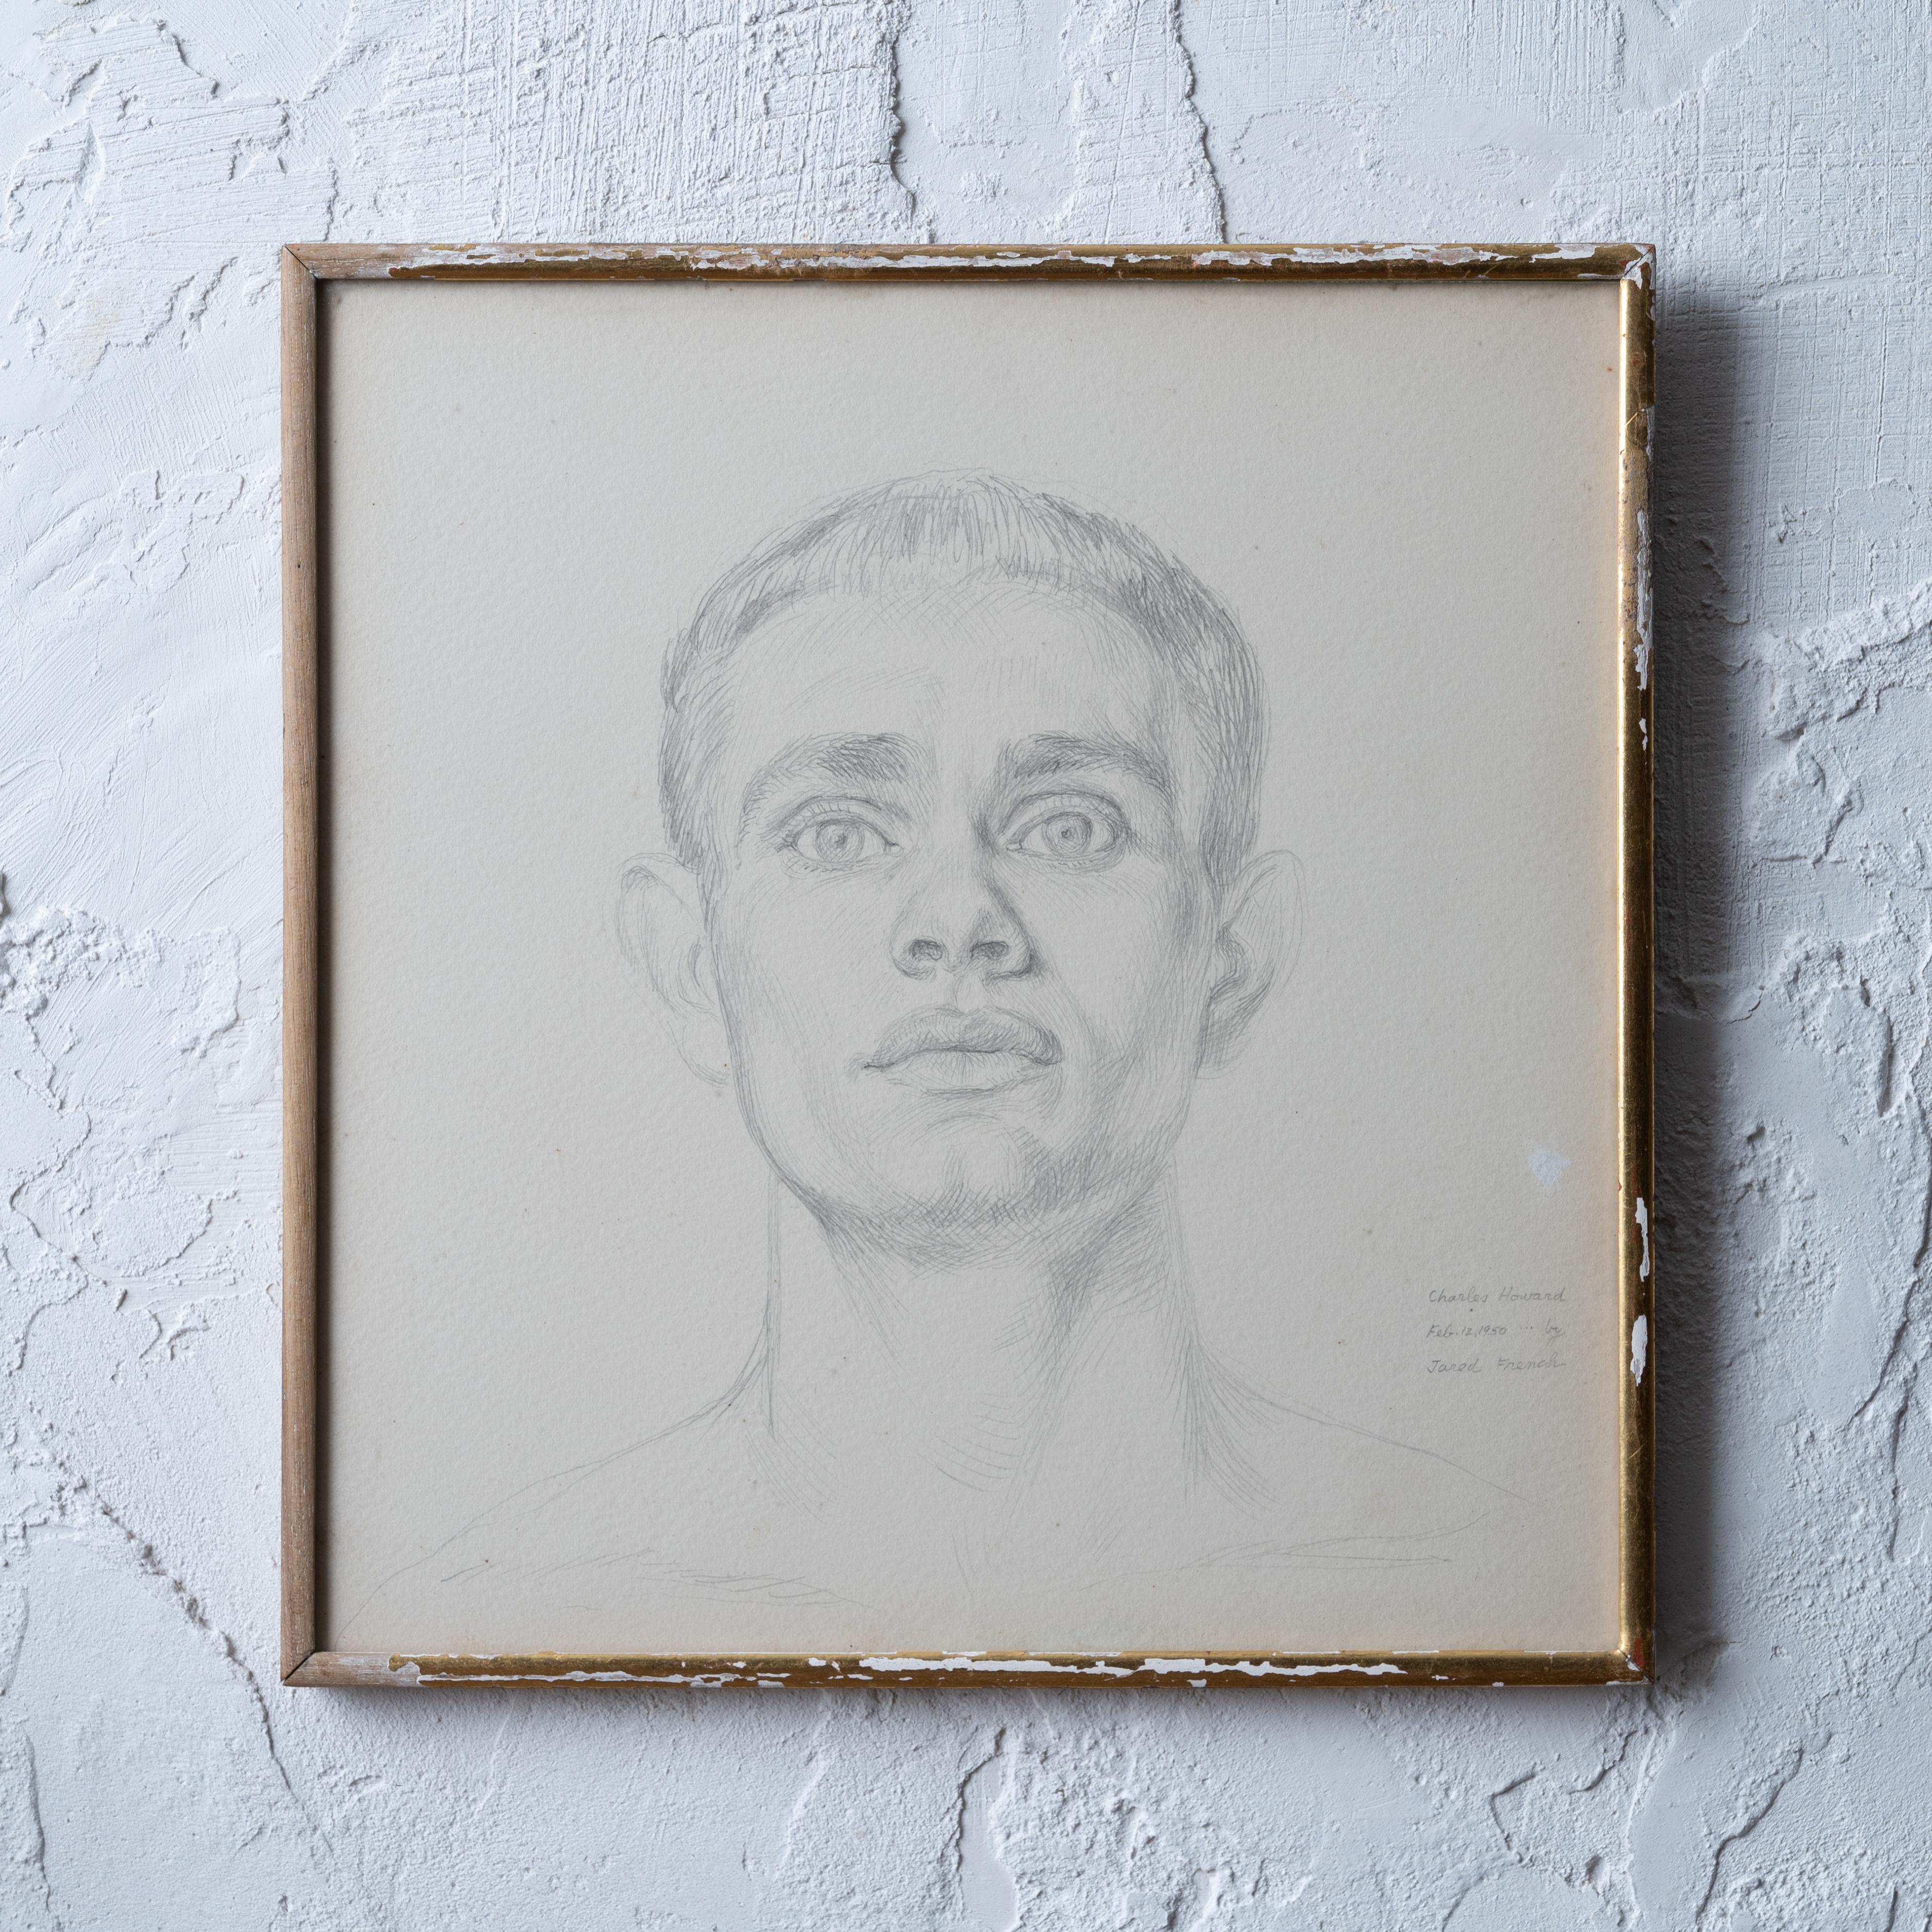 Jared French
(American, 1905-1988)

Portrait sketch of Chuck Howard
pencil on paper

signed and titled in margin: 
Charles Howard
Feb. 12, 1950 … by 
Jared French

Sight: 9 ¼ by 9 ¾ inches
frame: 9 ¾ by 10 ¼ inches
